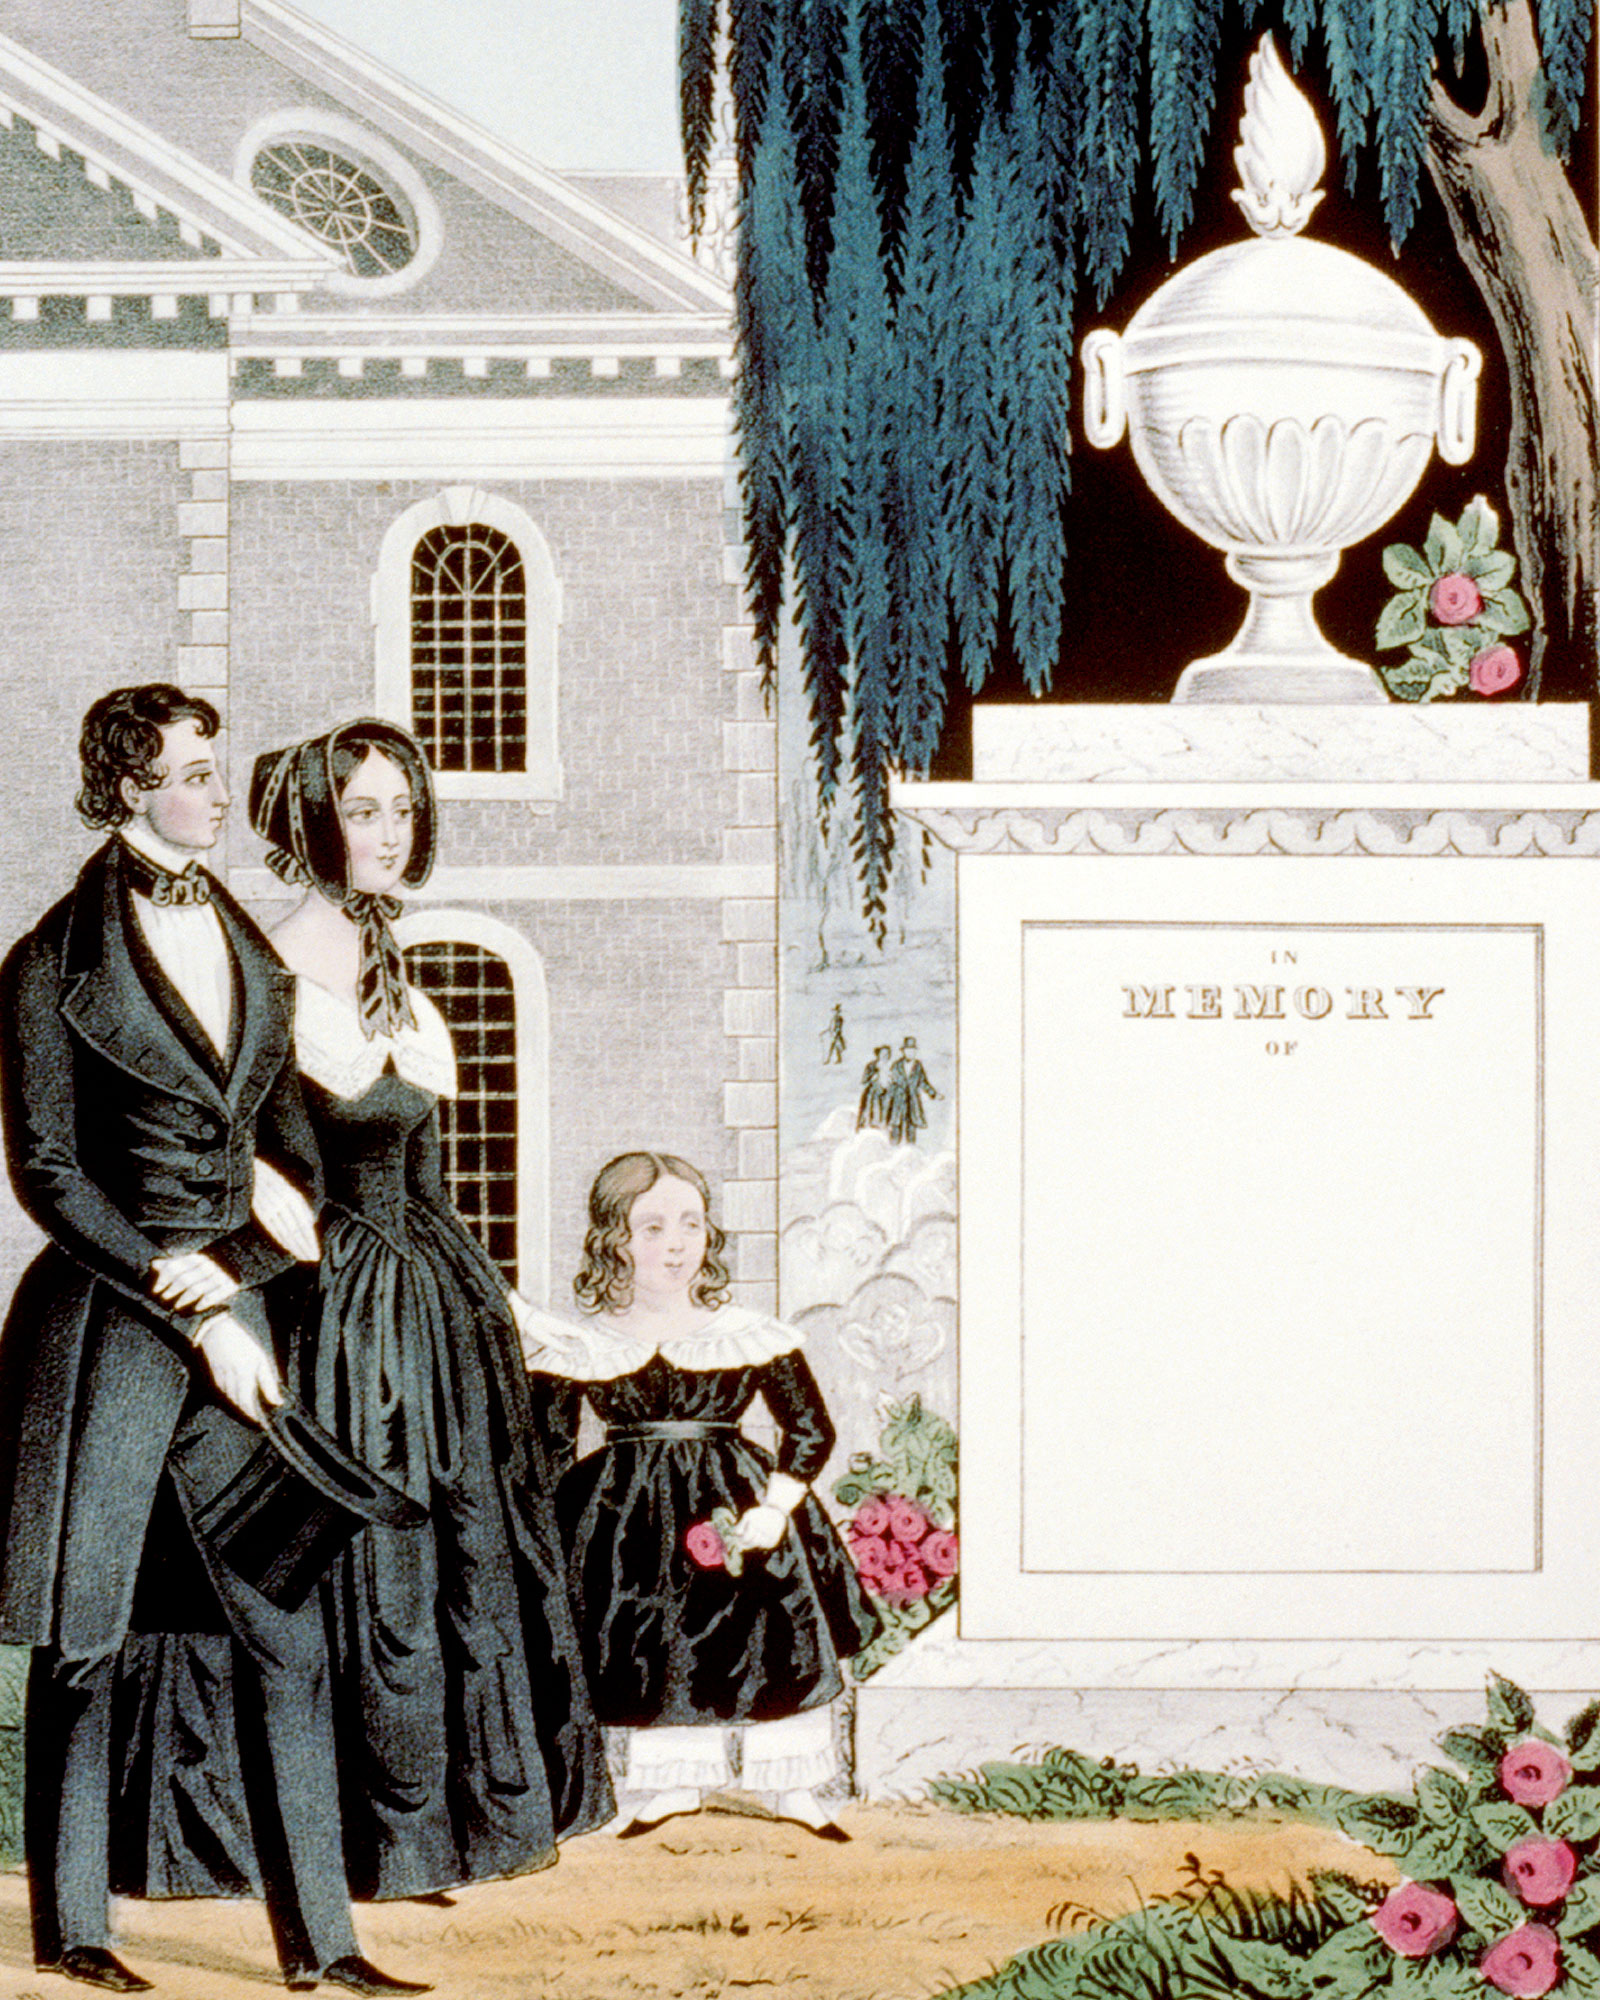 A circa eighteen forty-five blank memorial print by Nathaniel Currier depicting a family in front of a mausoleum on which is engraved ““In memory of.”